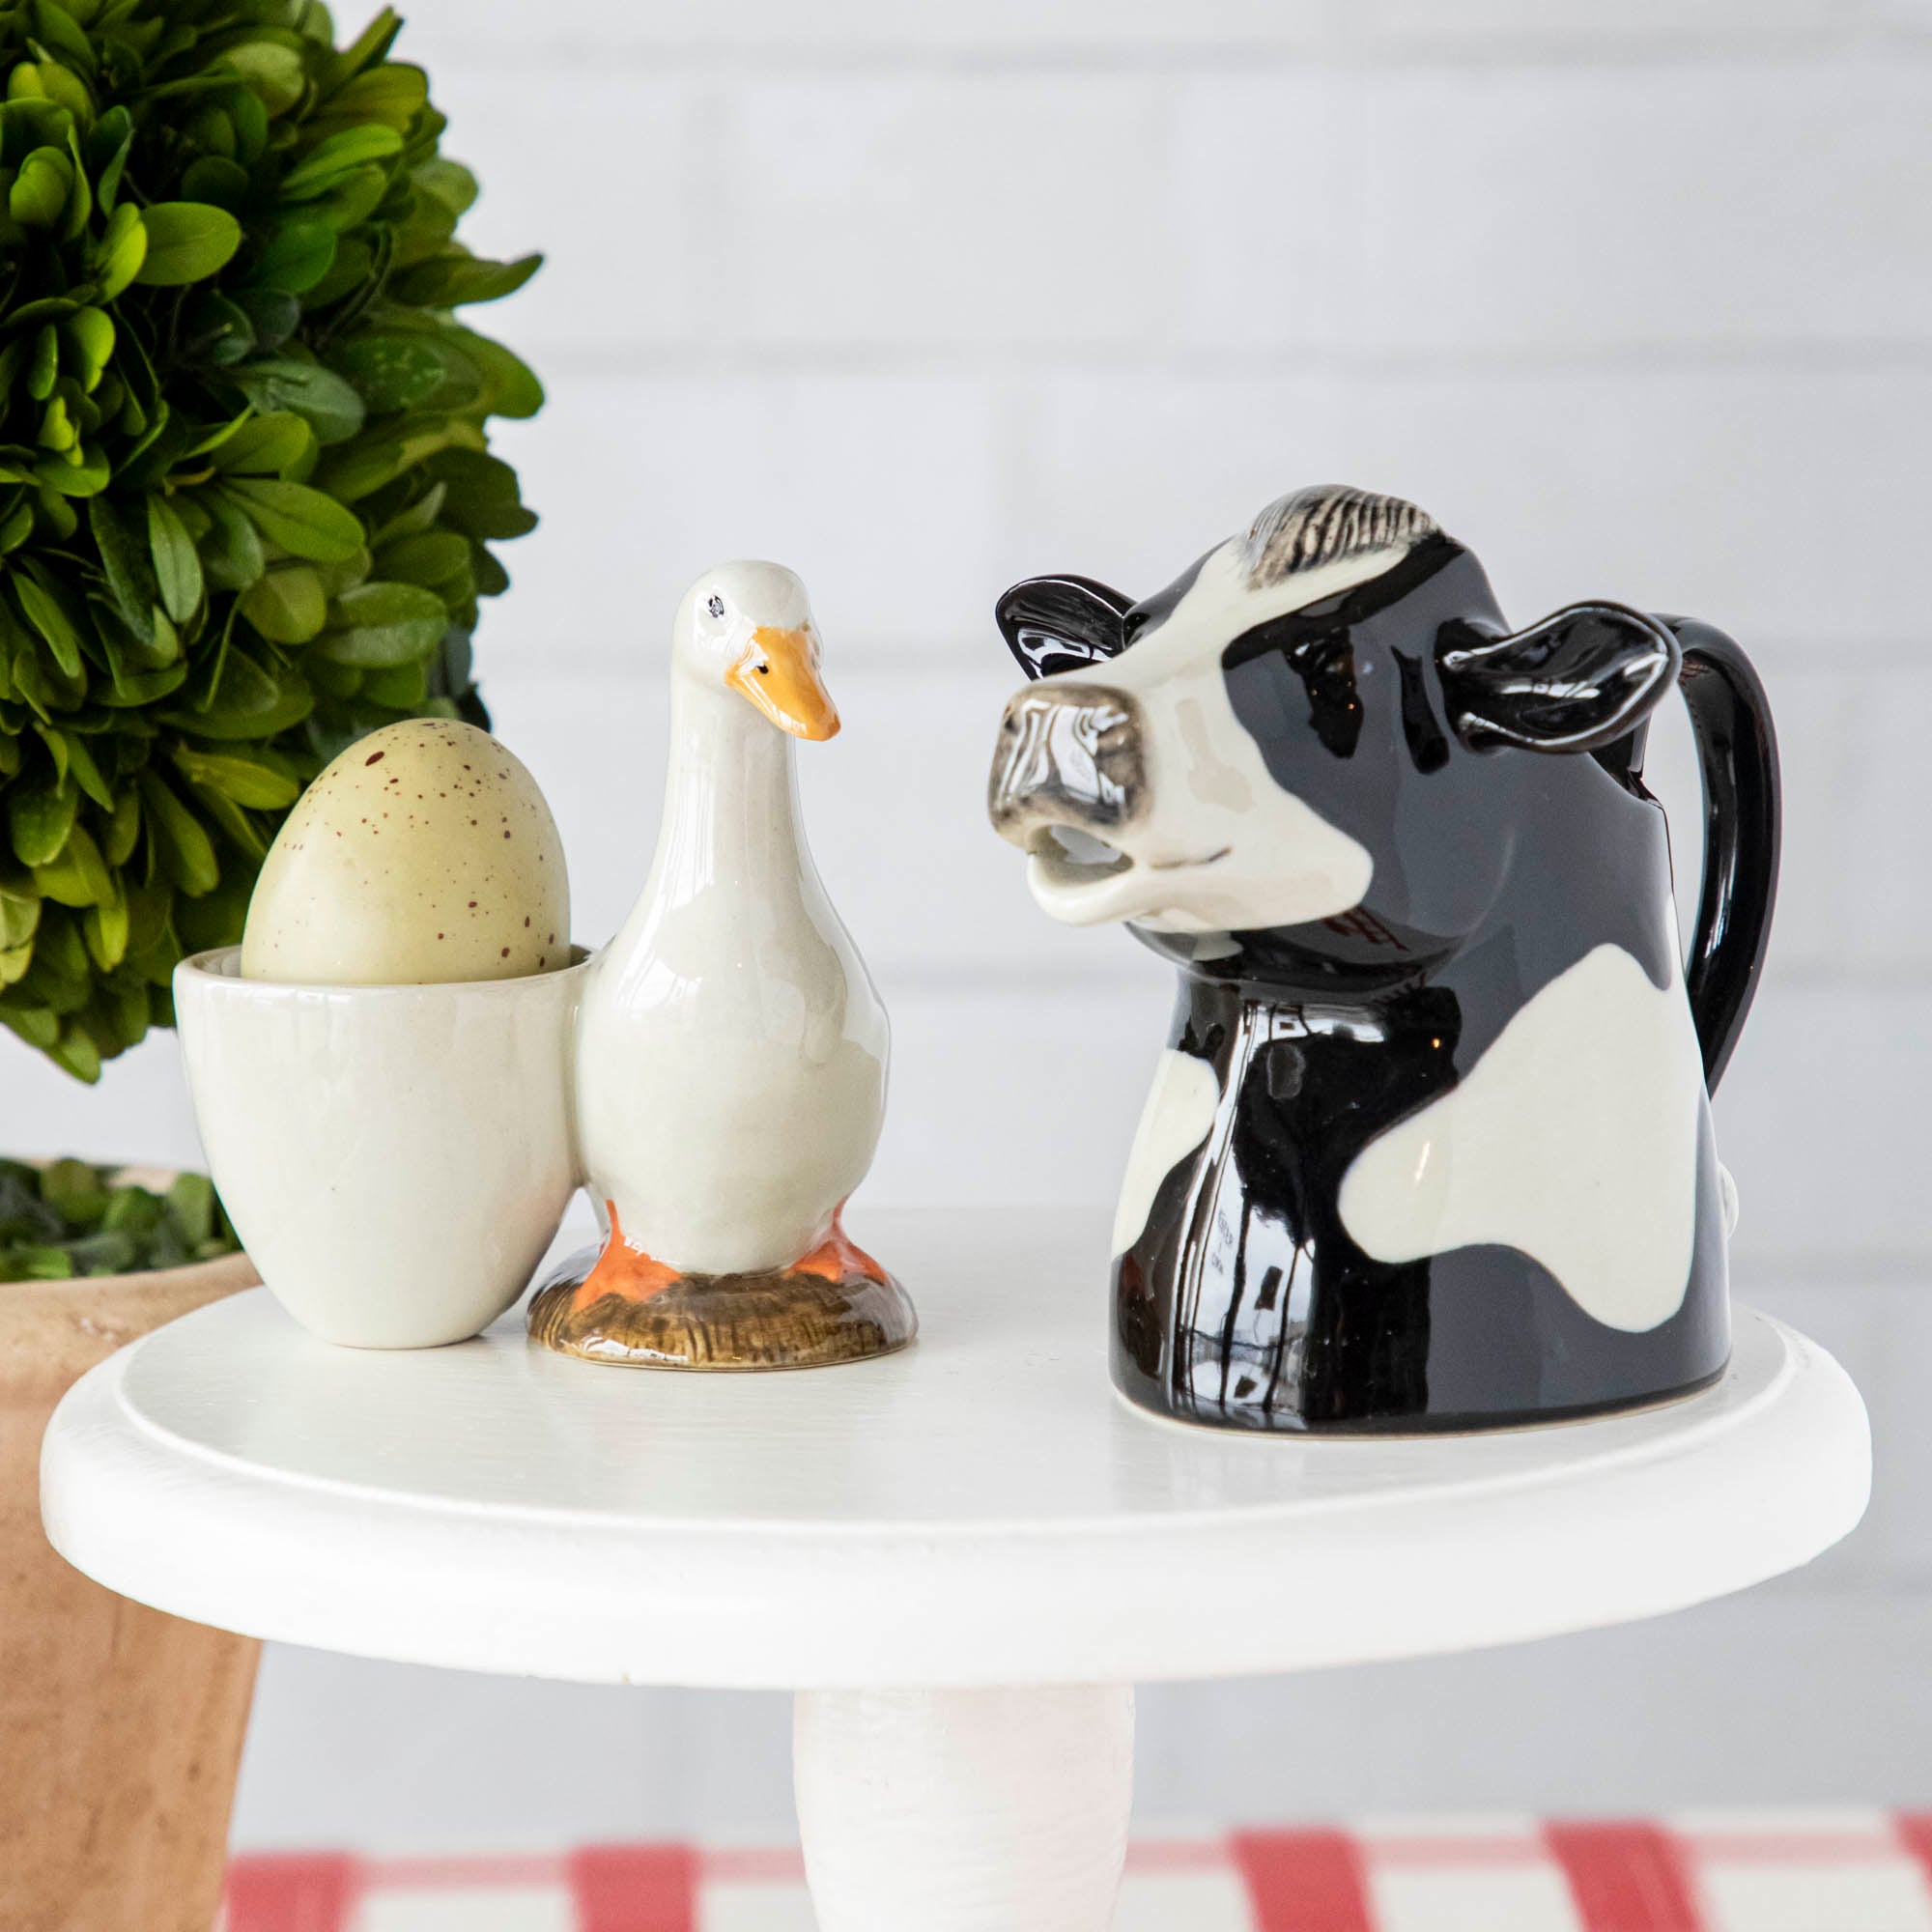 A black and white cow jug and a duck, two quirky pieces by Farm Animal Ceramics, a Quail brand, placed on a table.